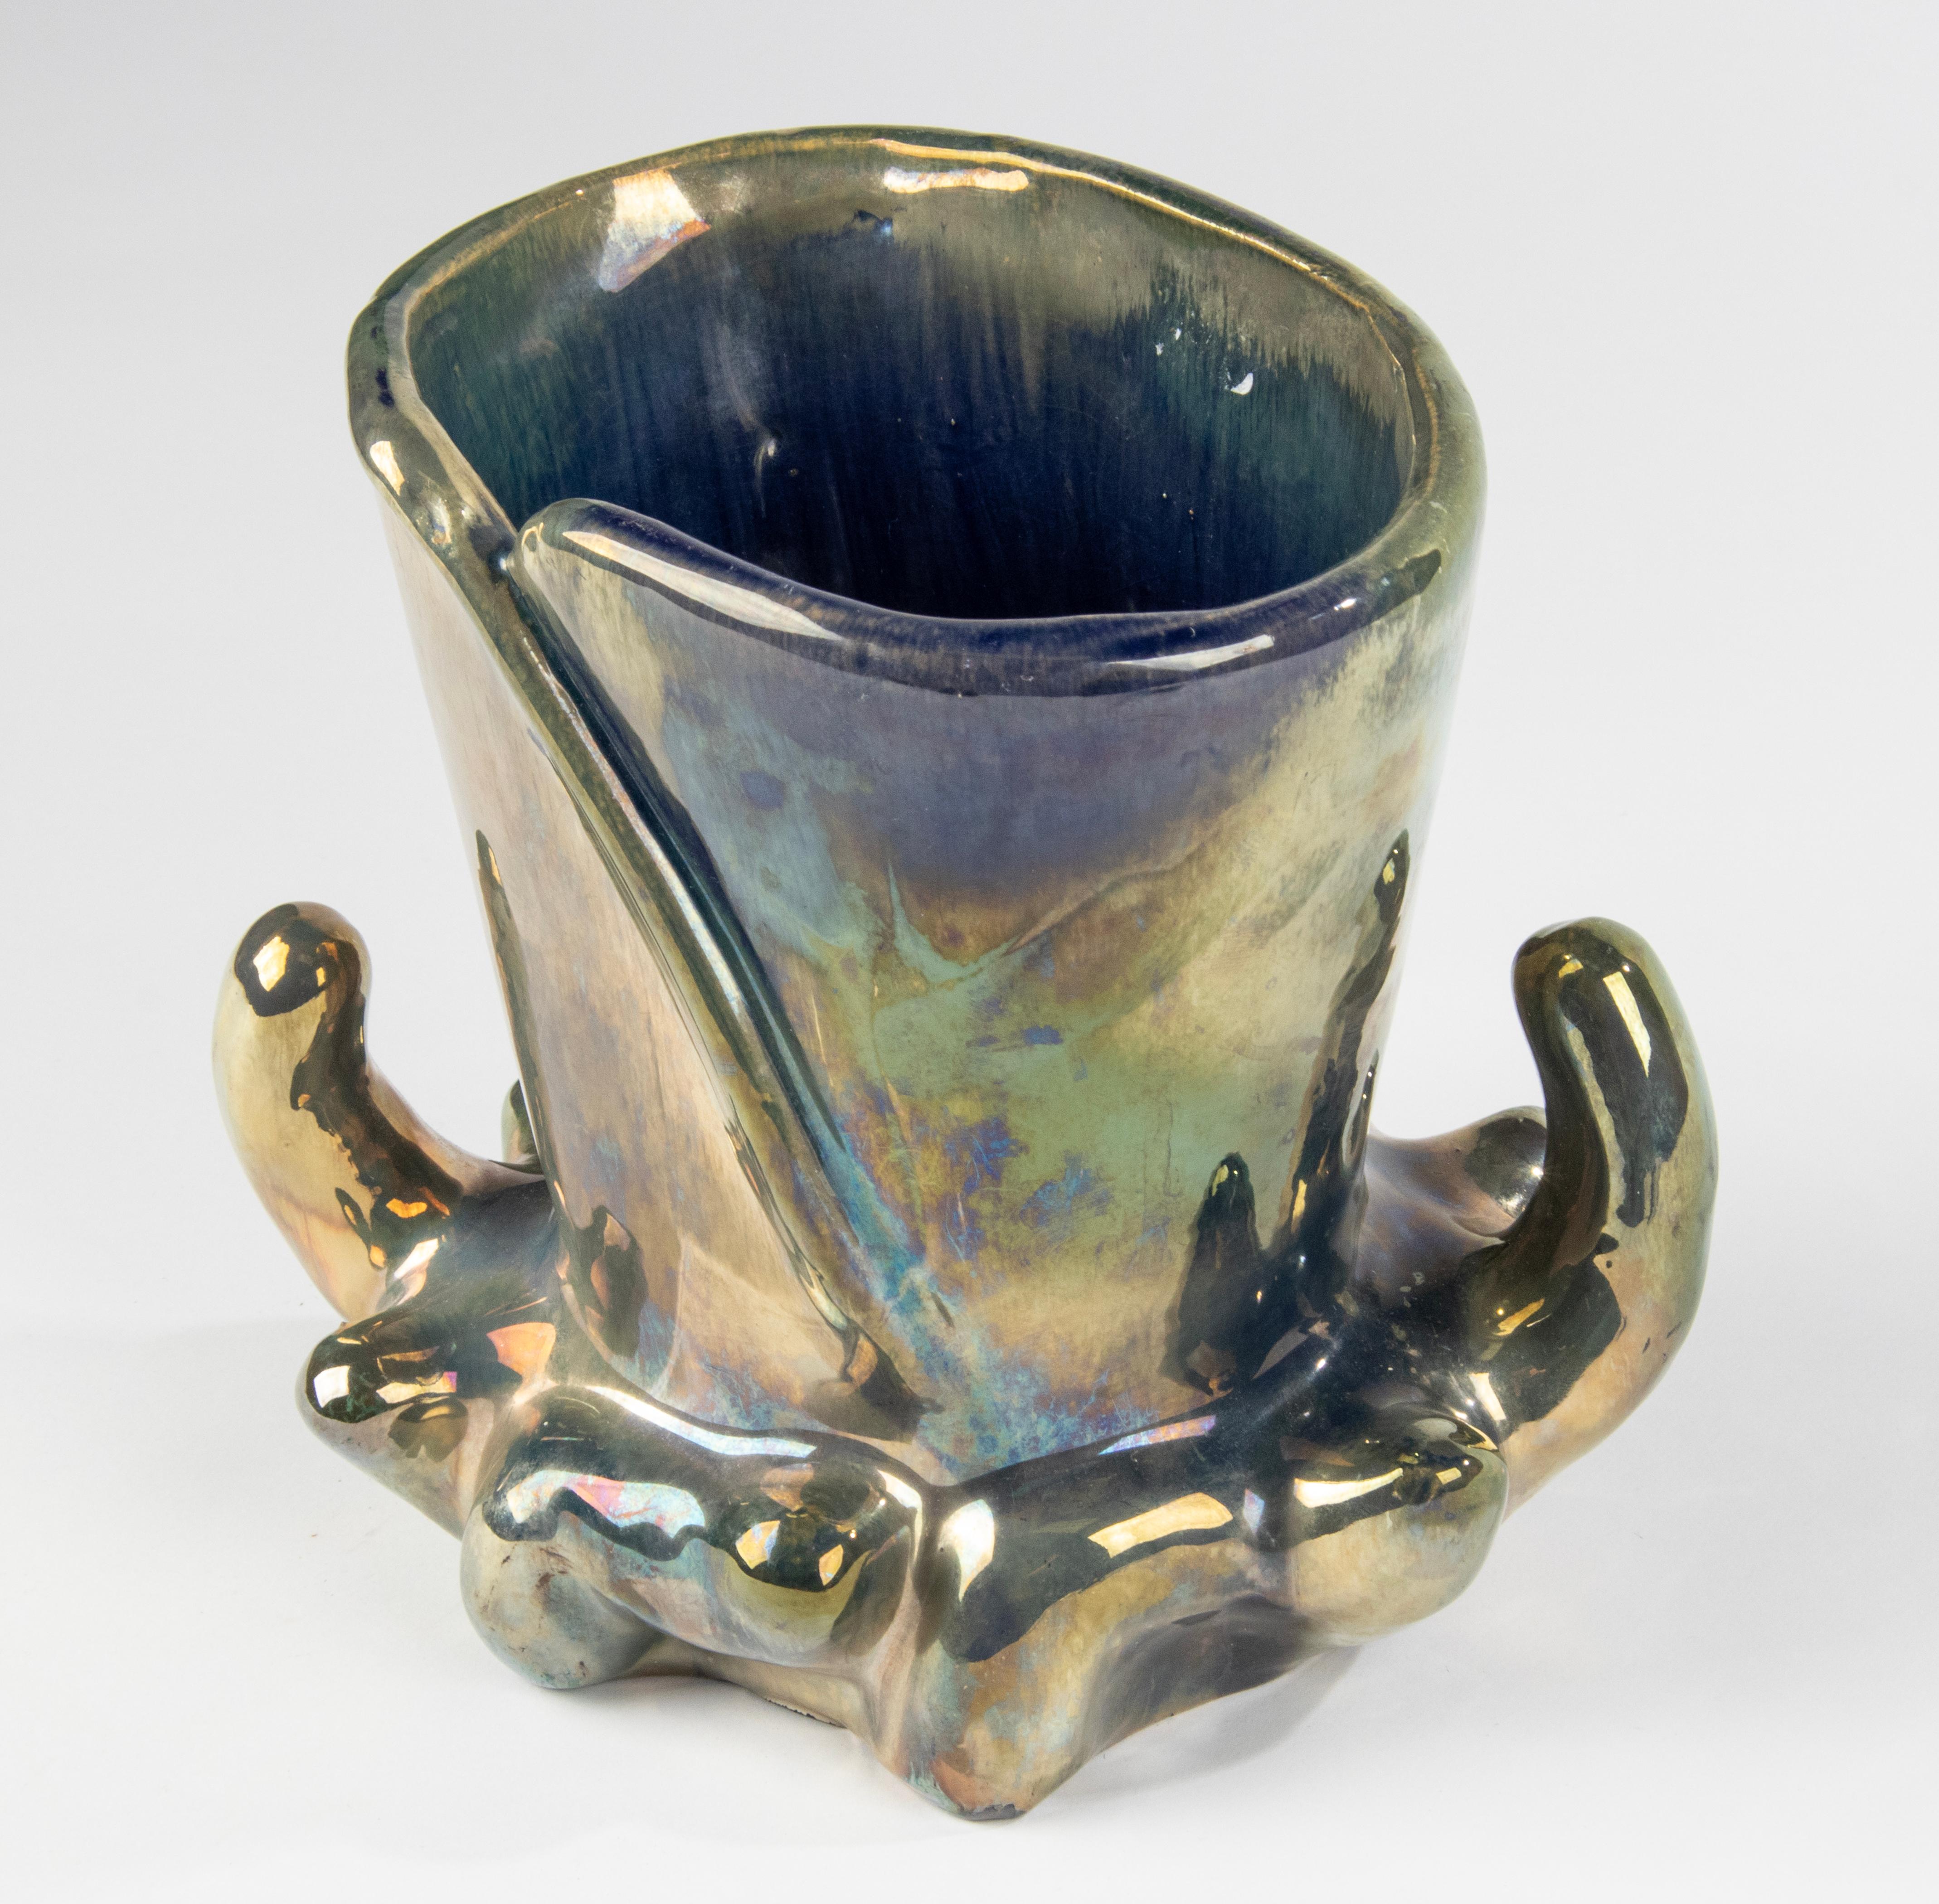 1930s Ceramic Art Deco Vase with Iridescent Glaze - Rambervilliers France For Sale 2